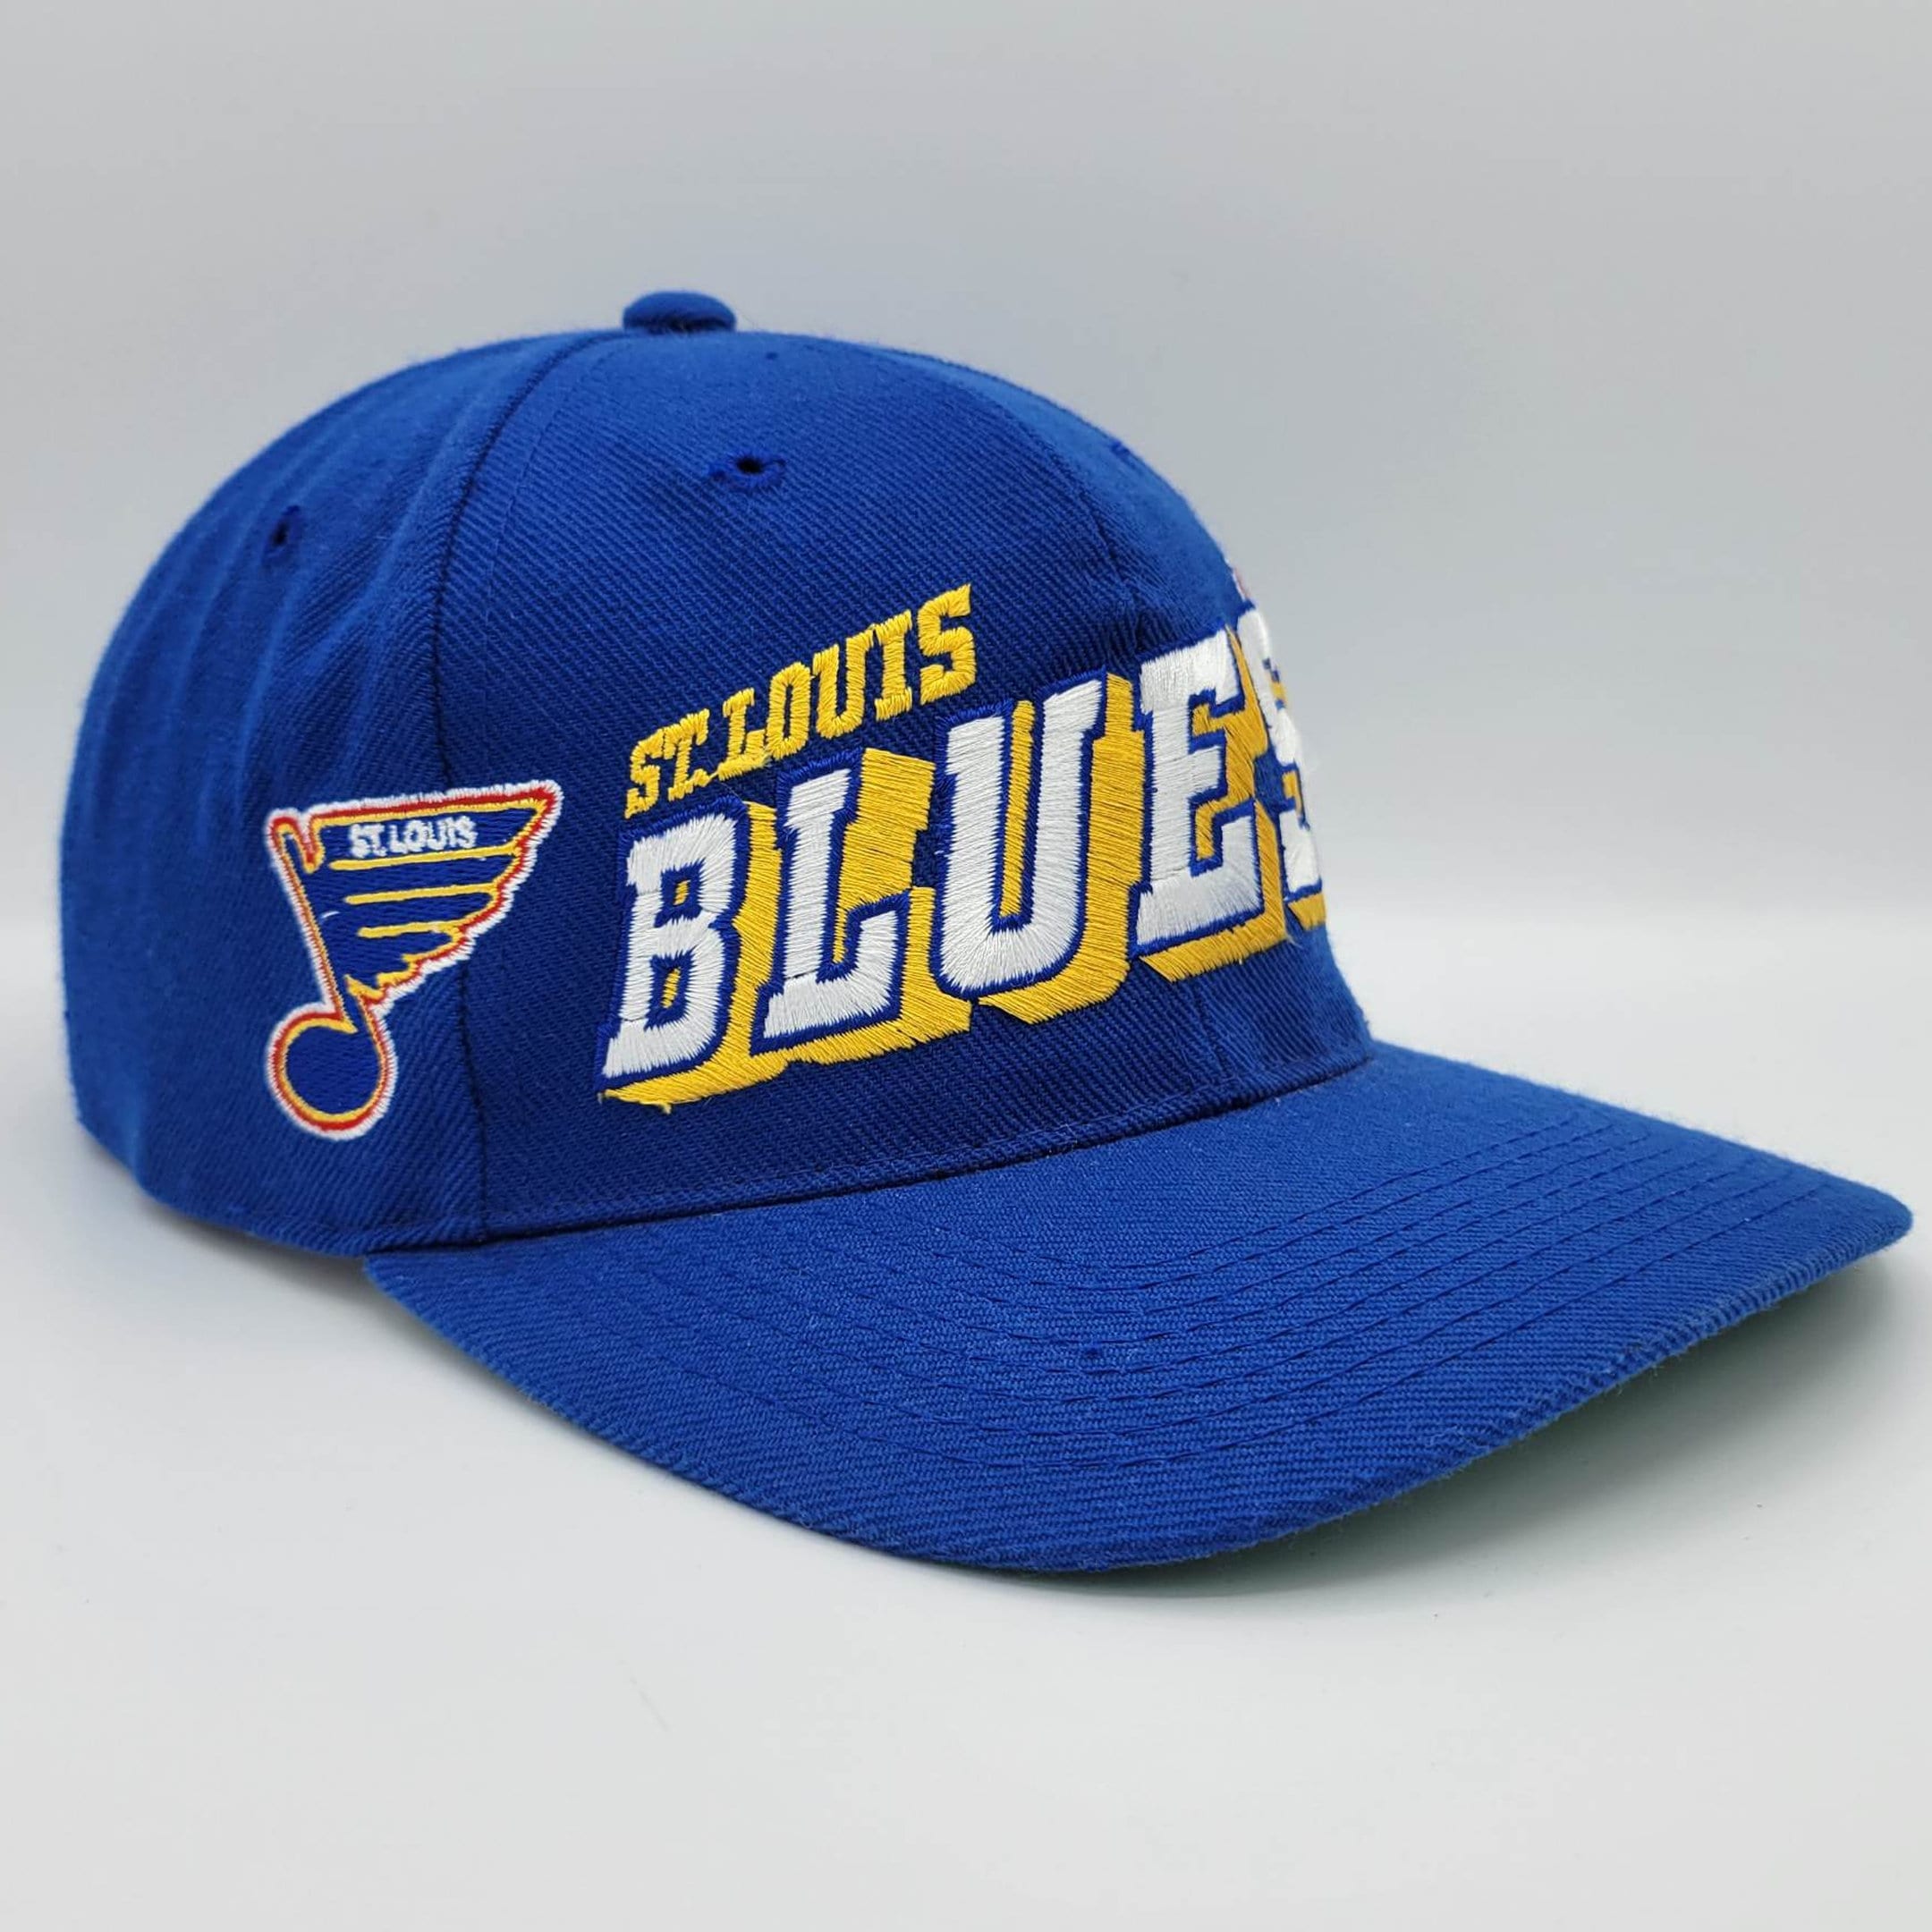 Blinged Green Camo St. Louis Blues With Black Blue Note 